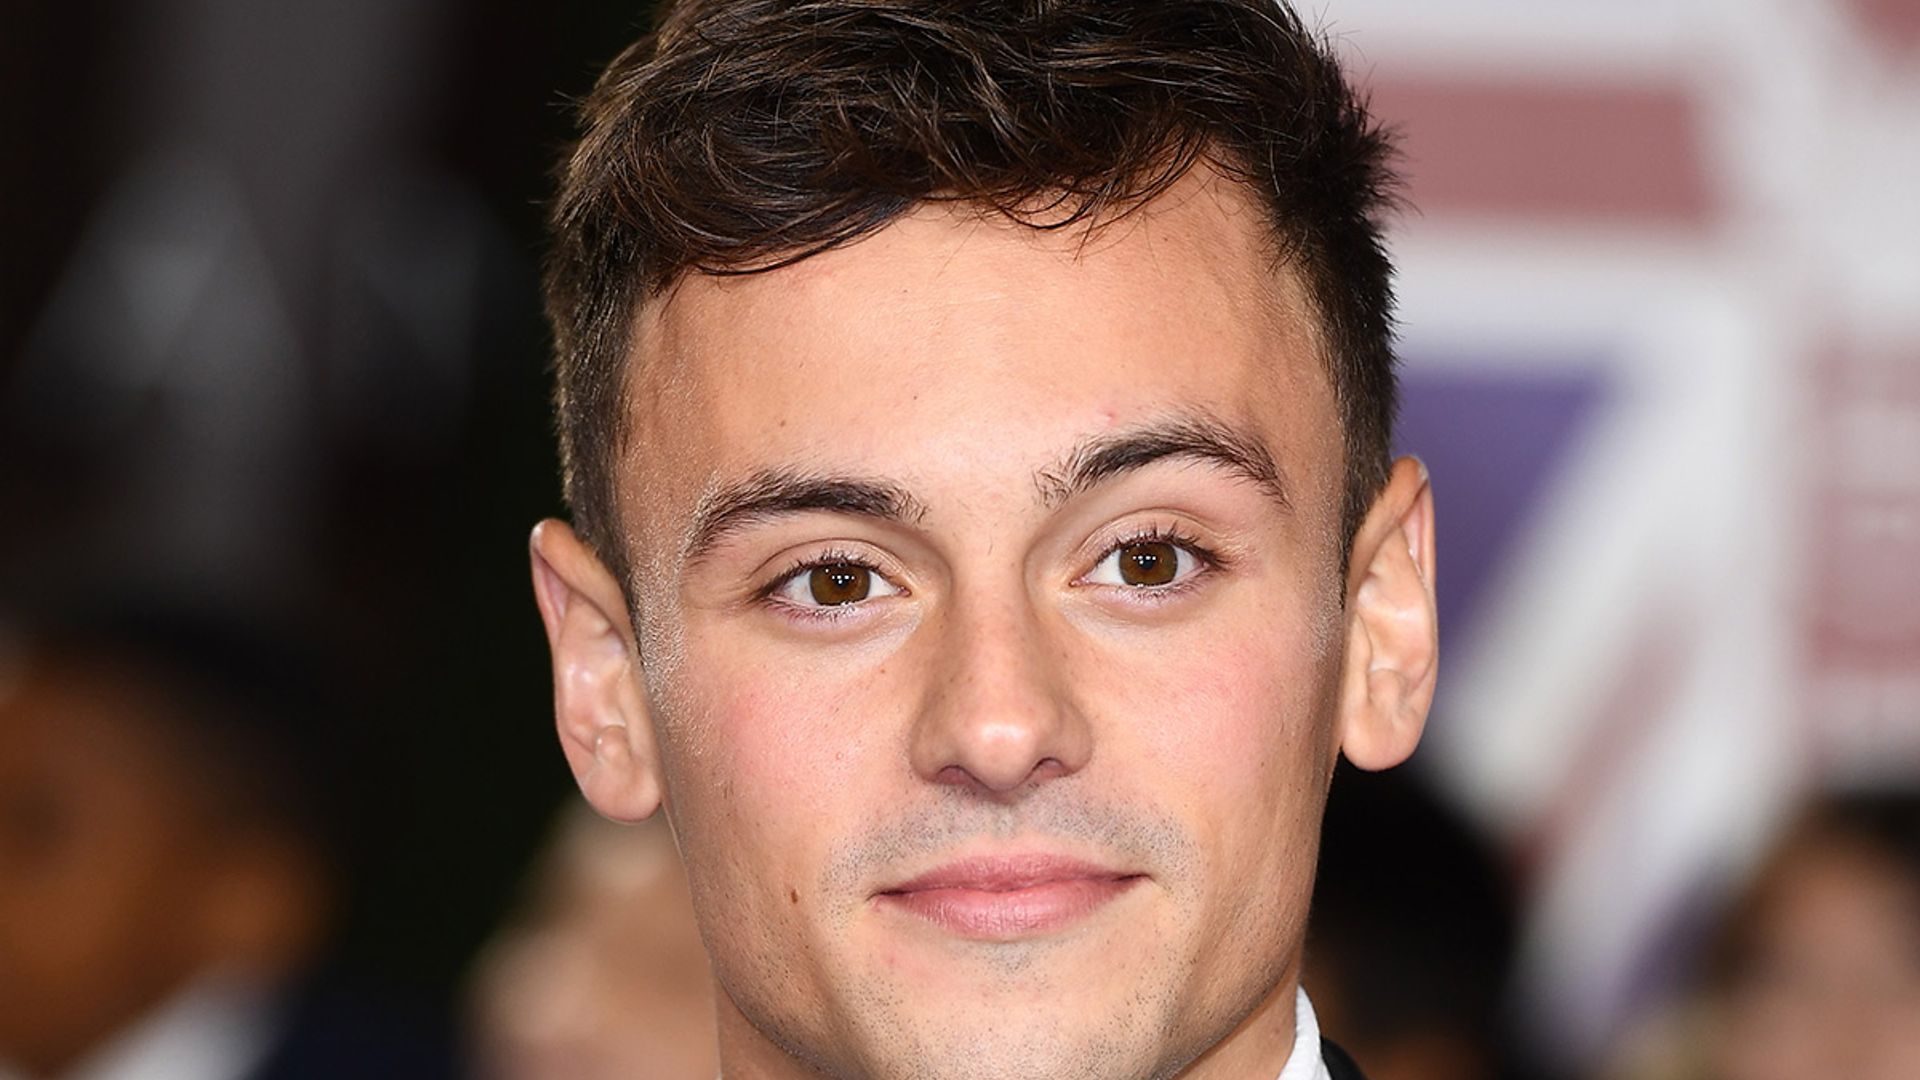 Tom Daley reveals one of son Robbie's baking habits in cute video